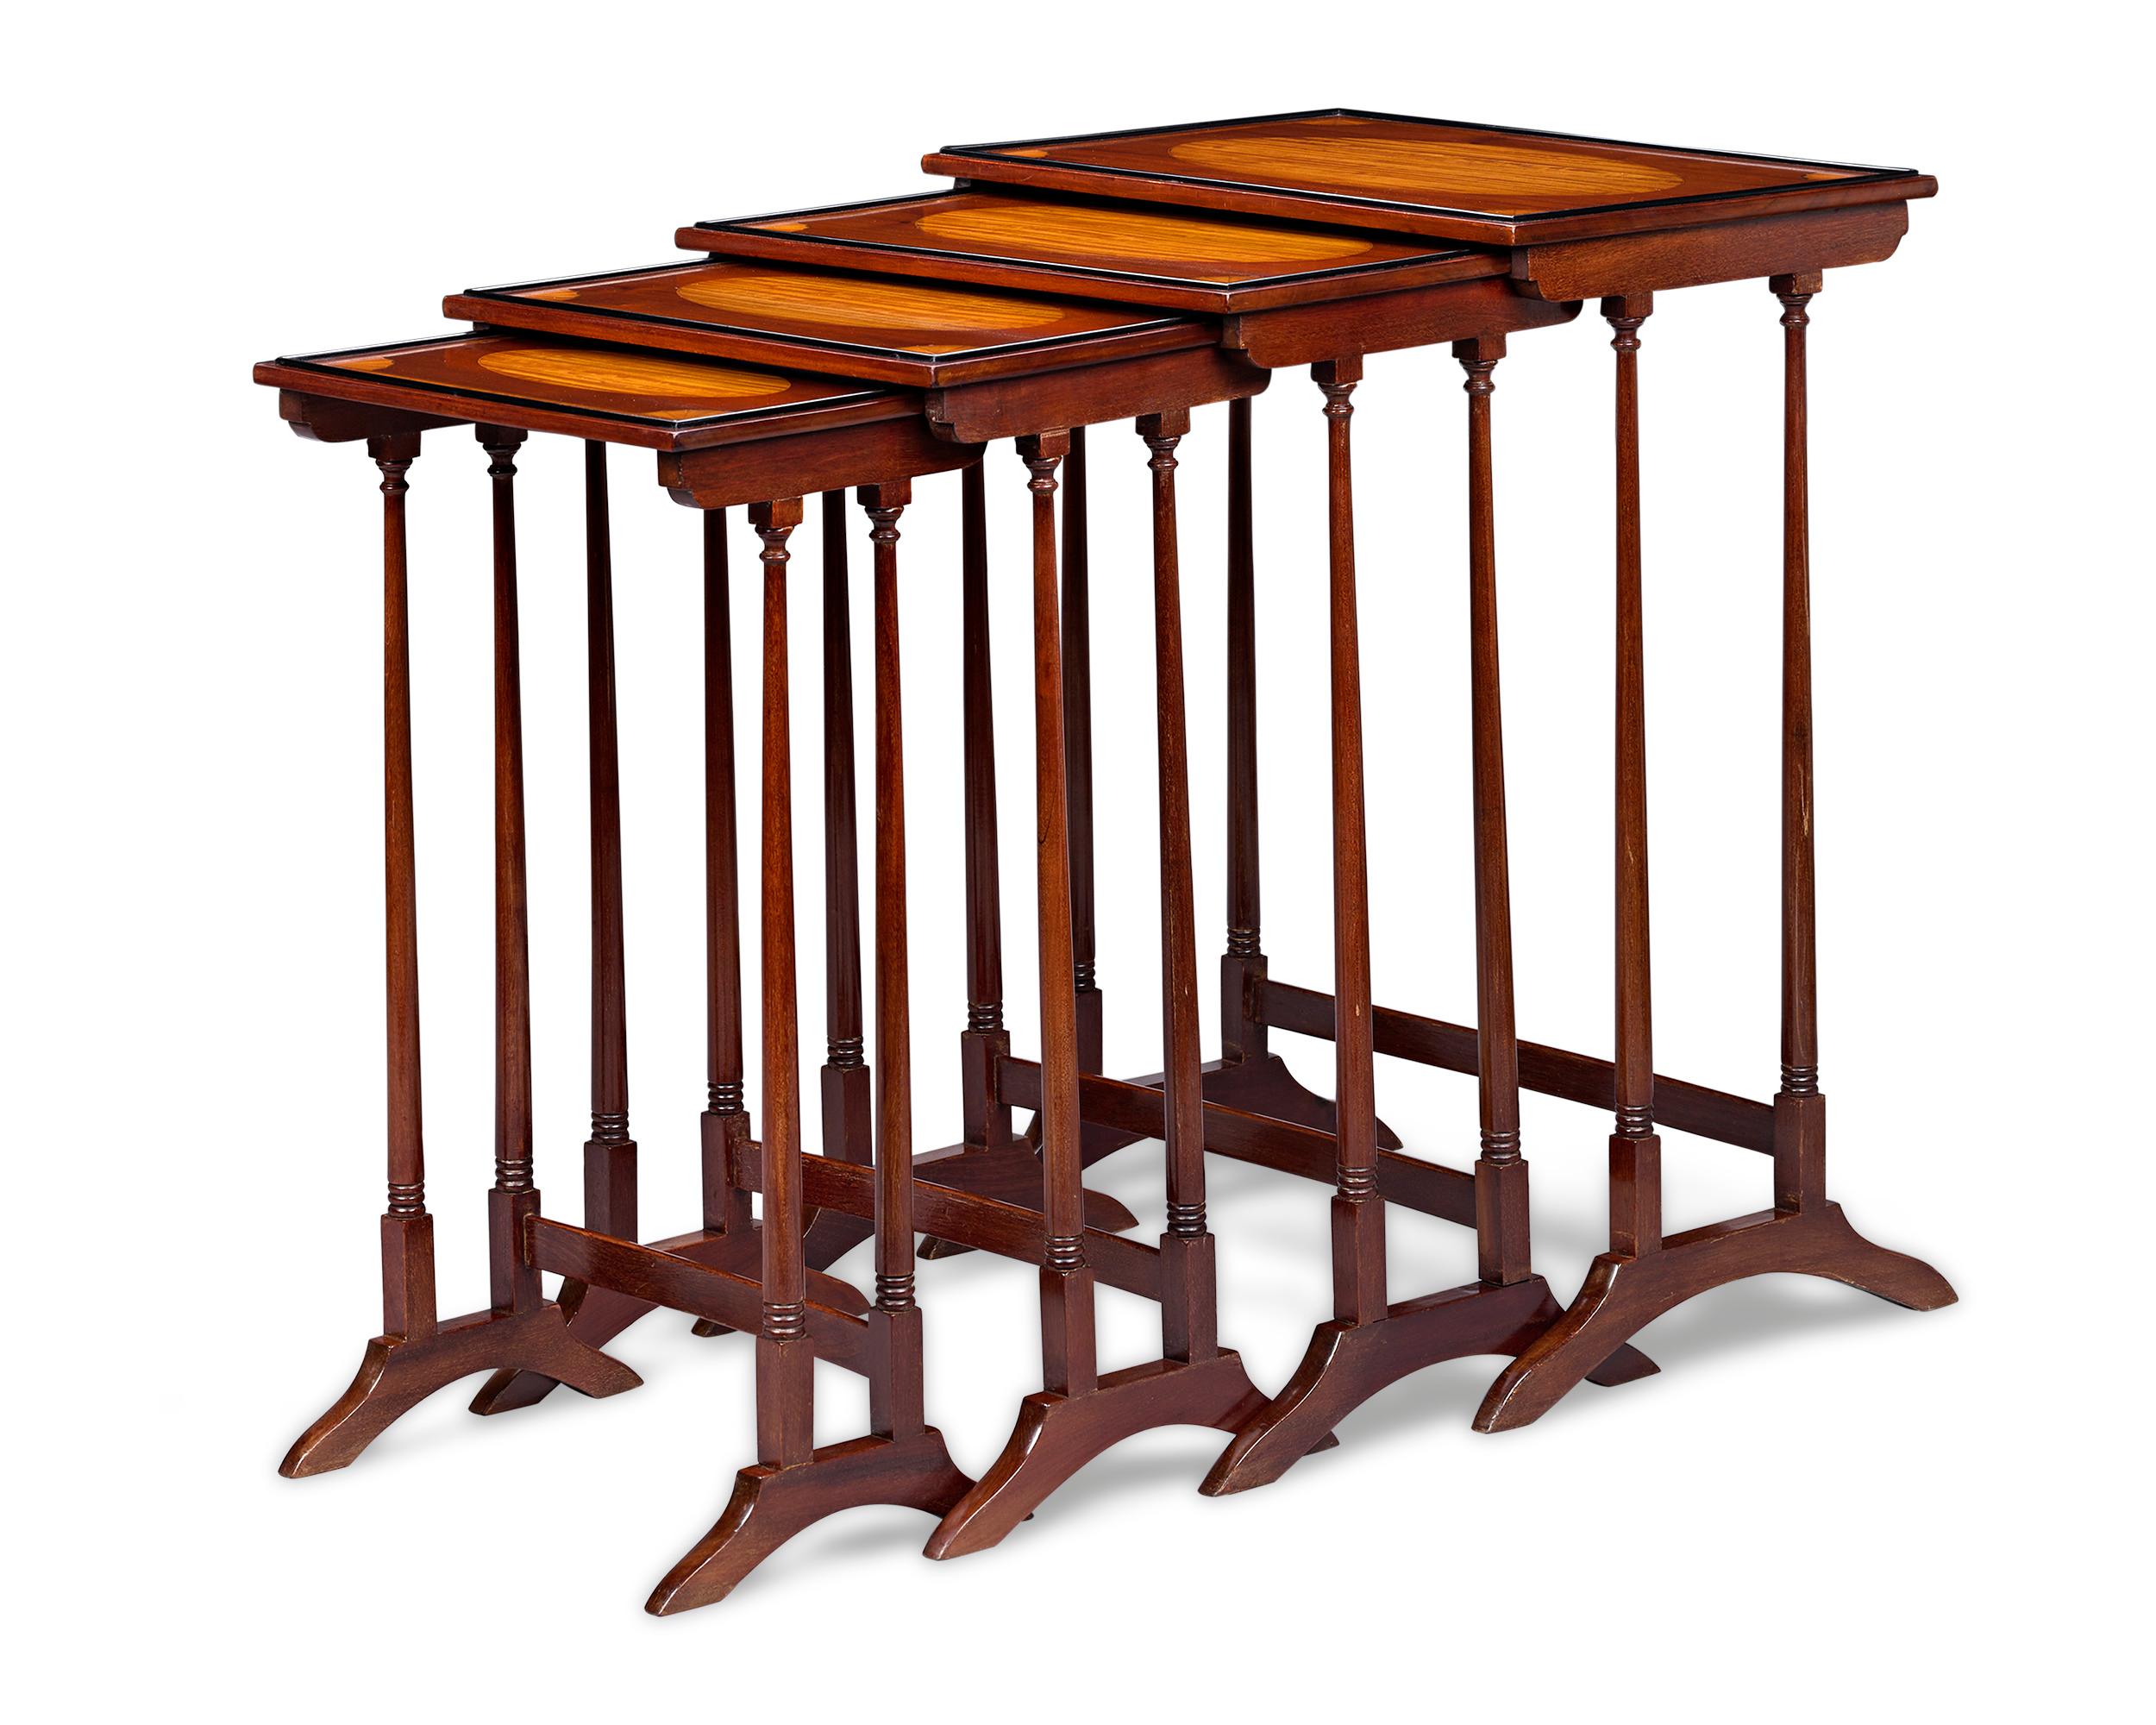 This suite of mahogany quartetto nesting tables displays the refinement found only in the finest English Victorian furnishings. Featuring beautiful satinwood marquetry on the tops, these tables would make a charming addition to any living space. In